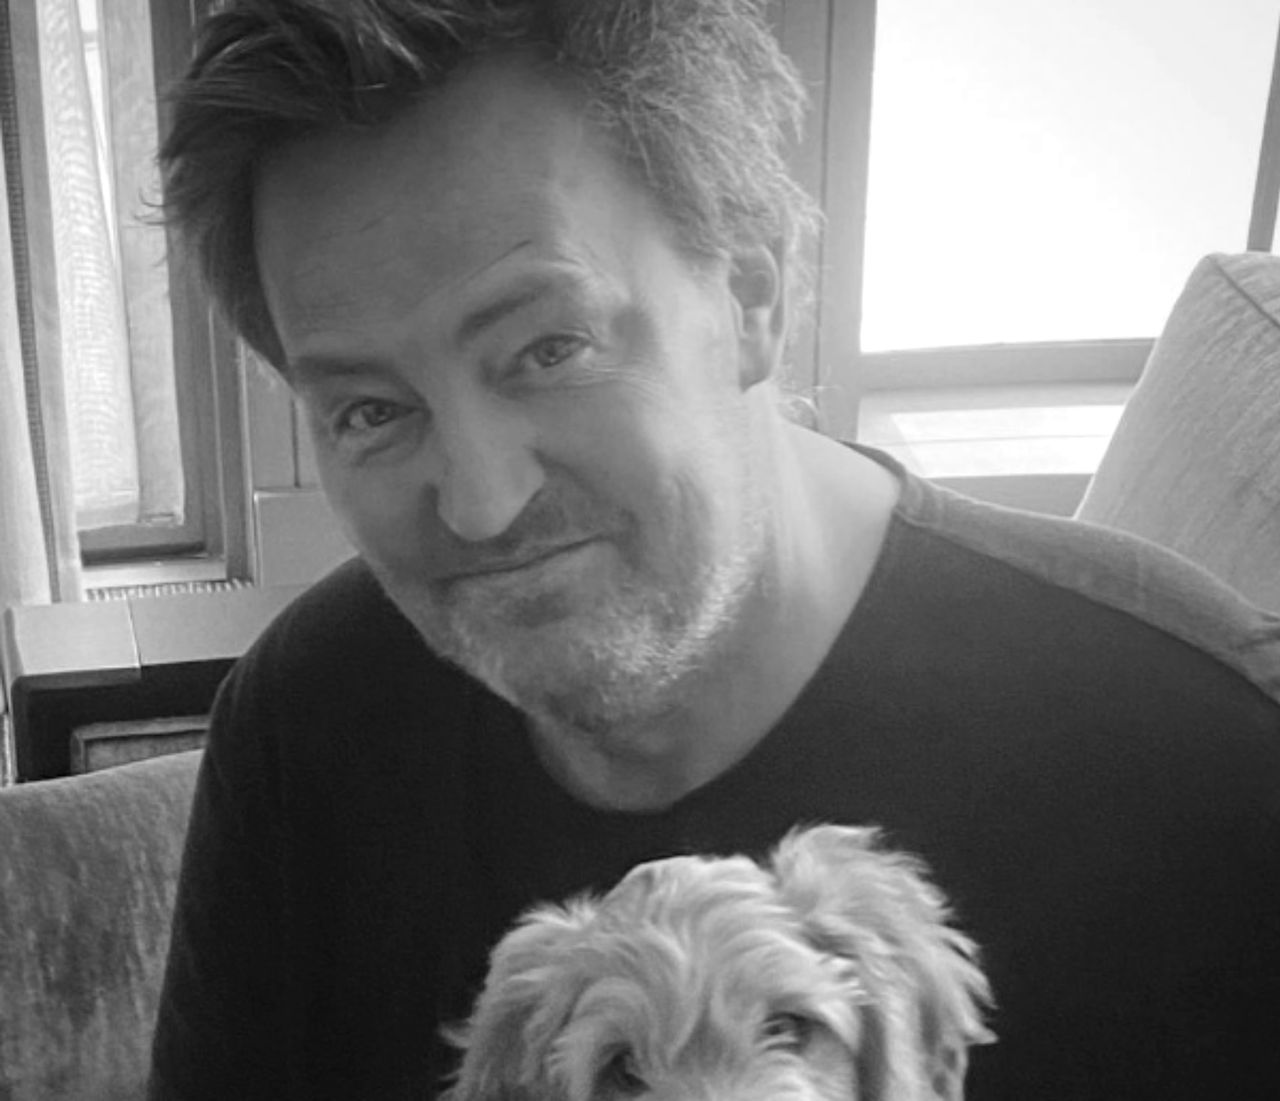 Initial toxicology results released in Matthew Perry's passing